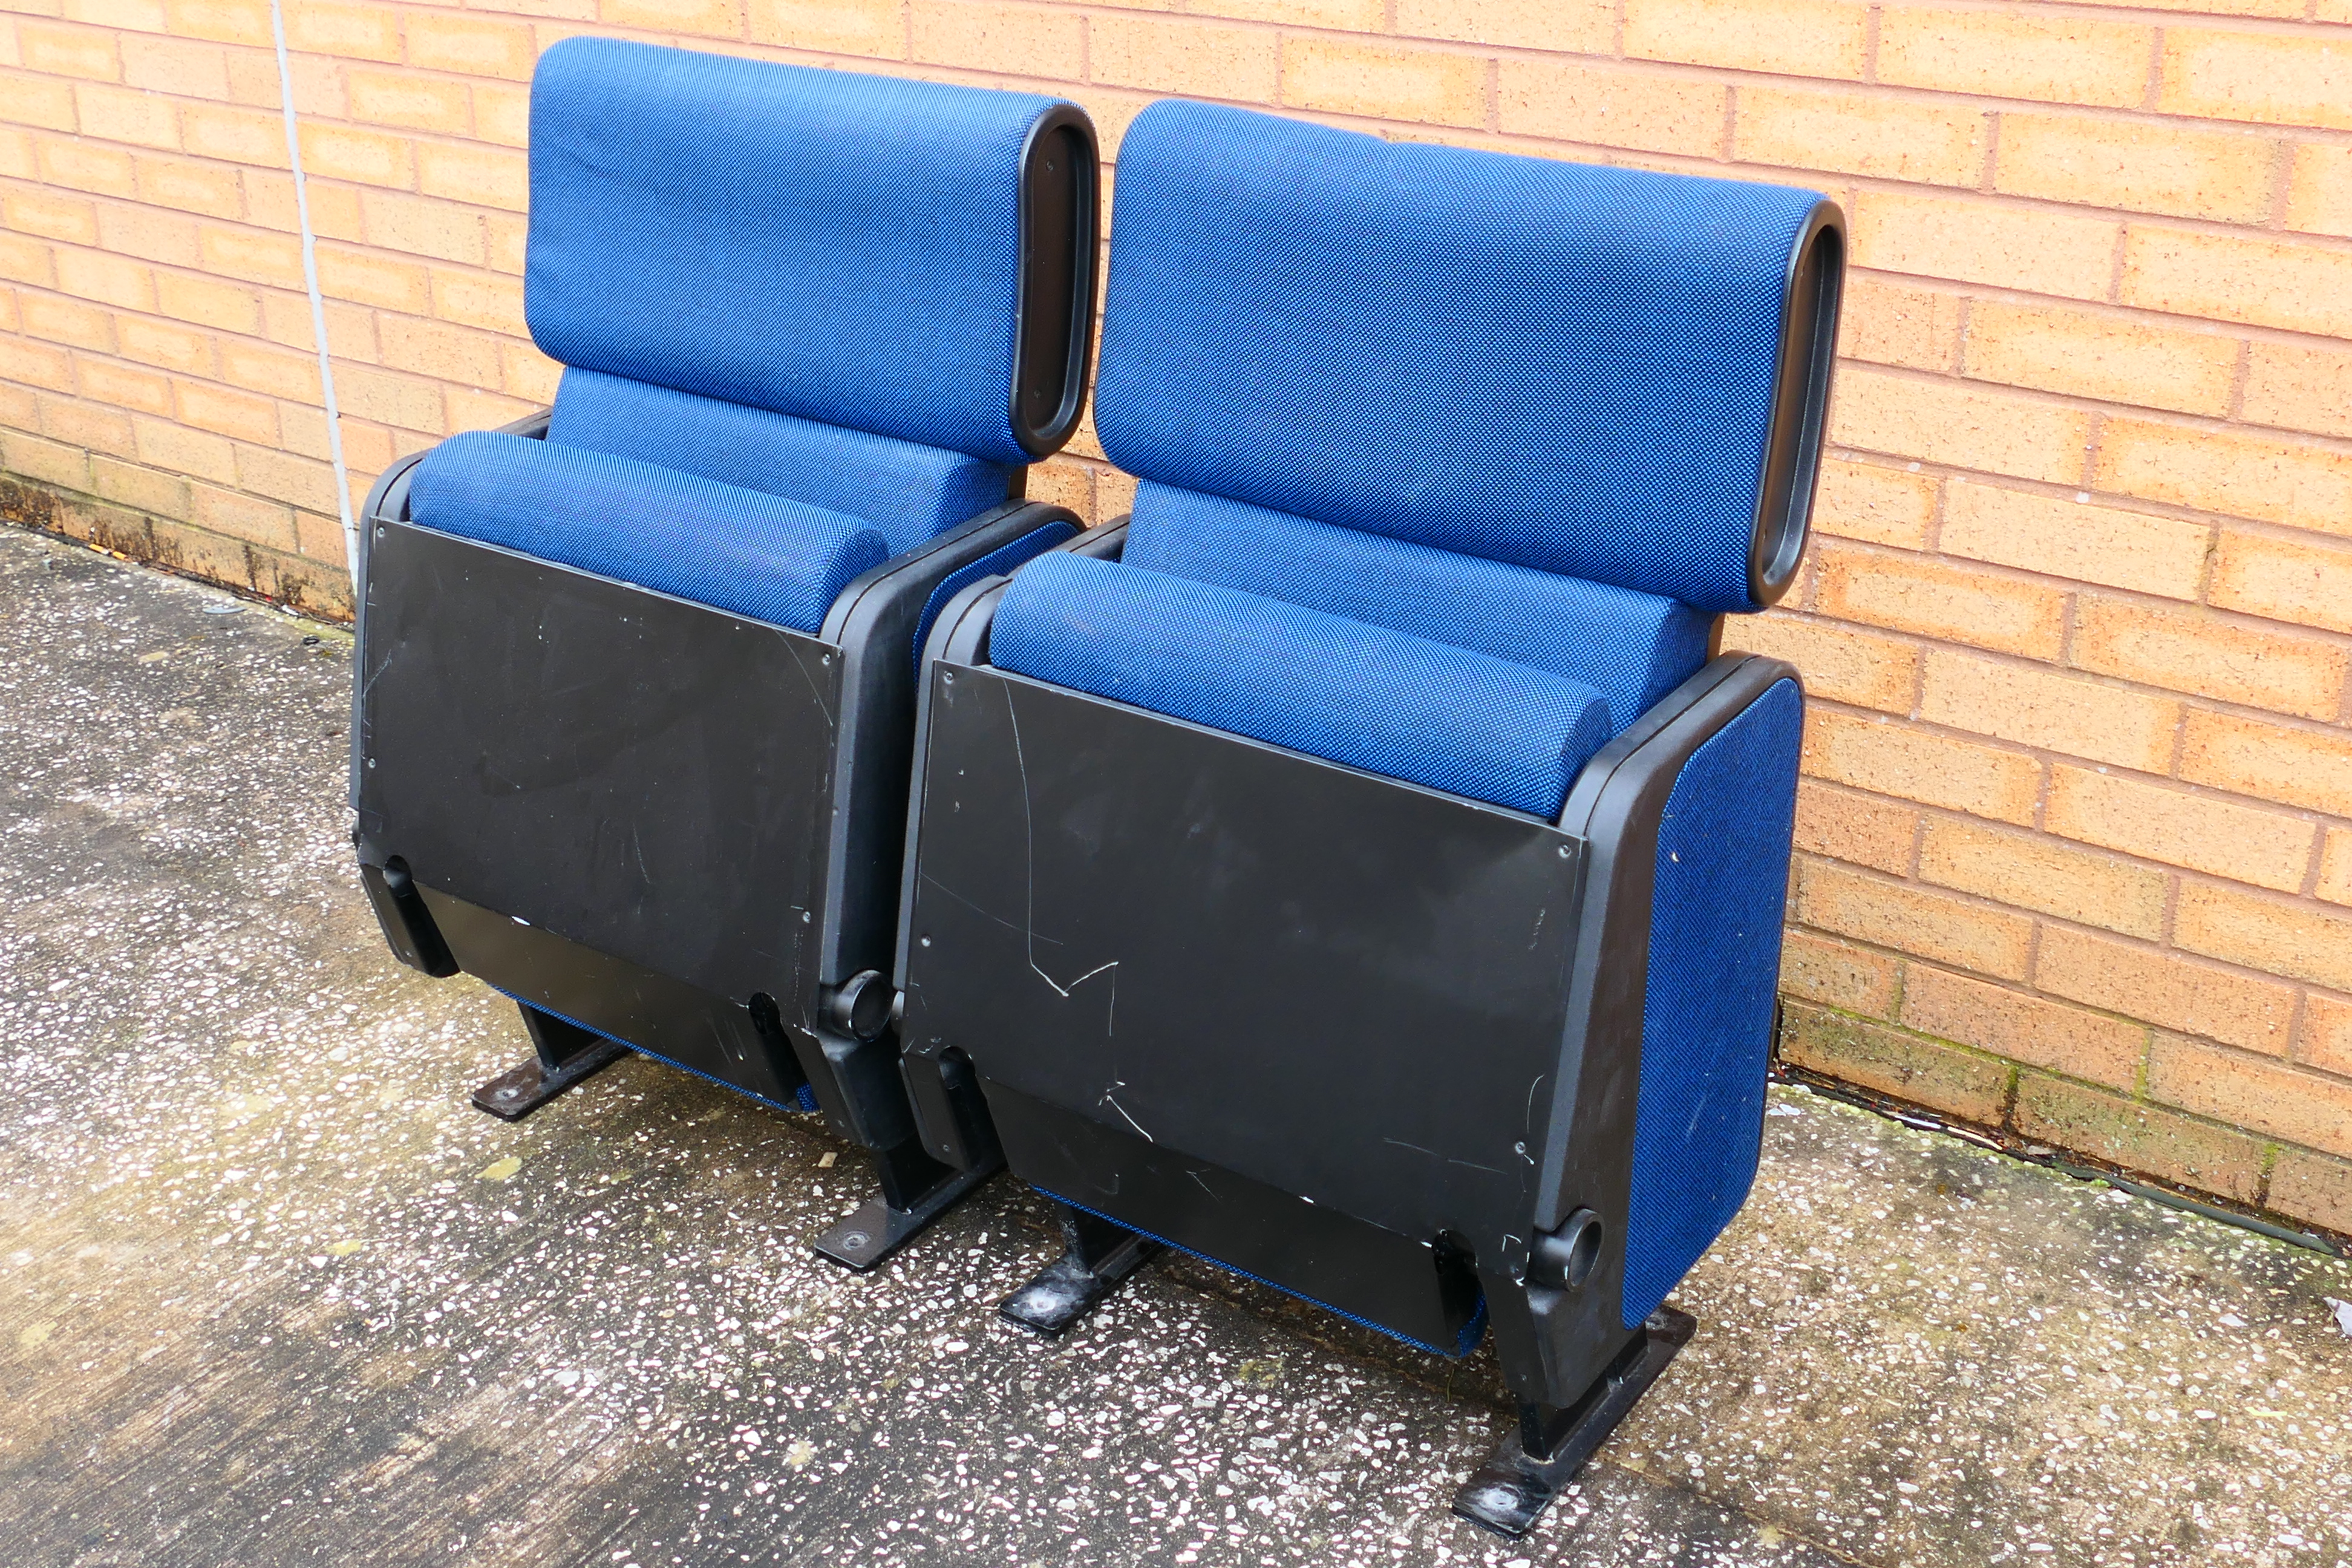 Cinema Chairs - A pair of retro folding cinema chairs. Chairs have blue fabric and metal legs. - Image 2 of 3